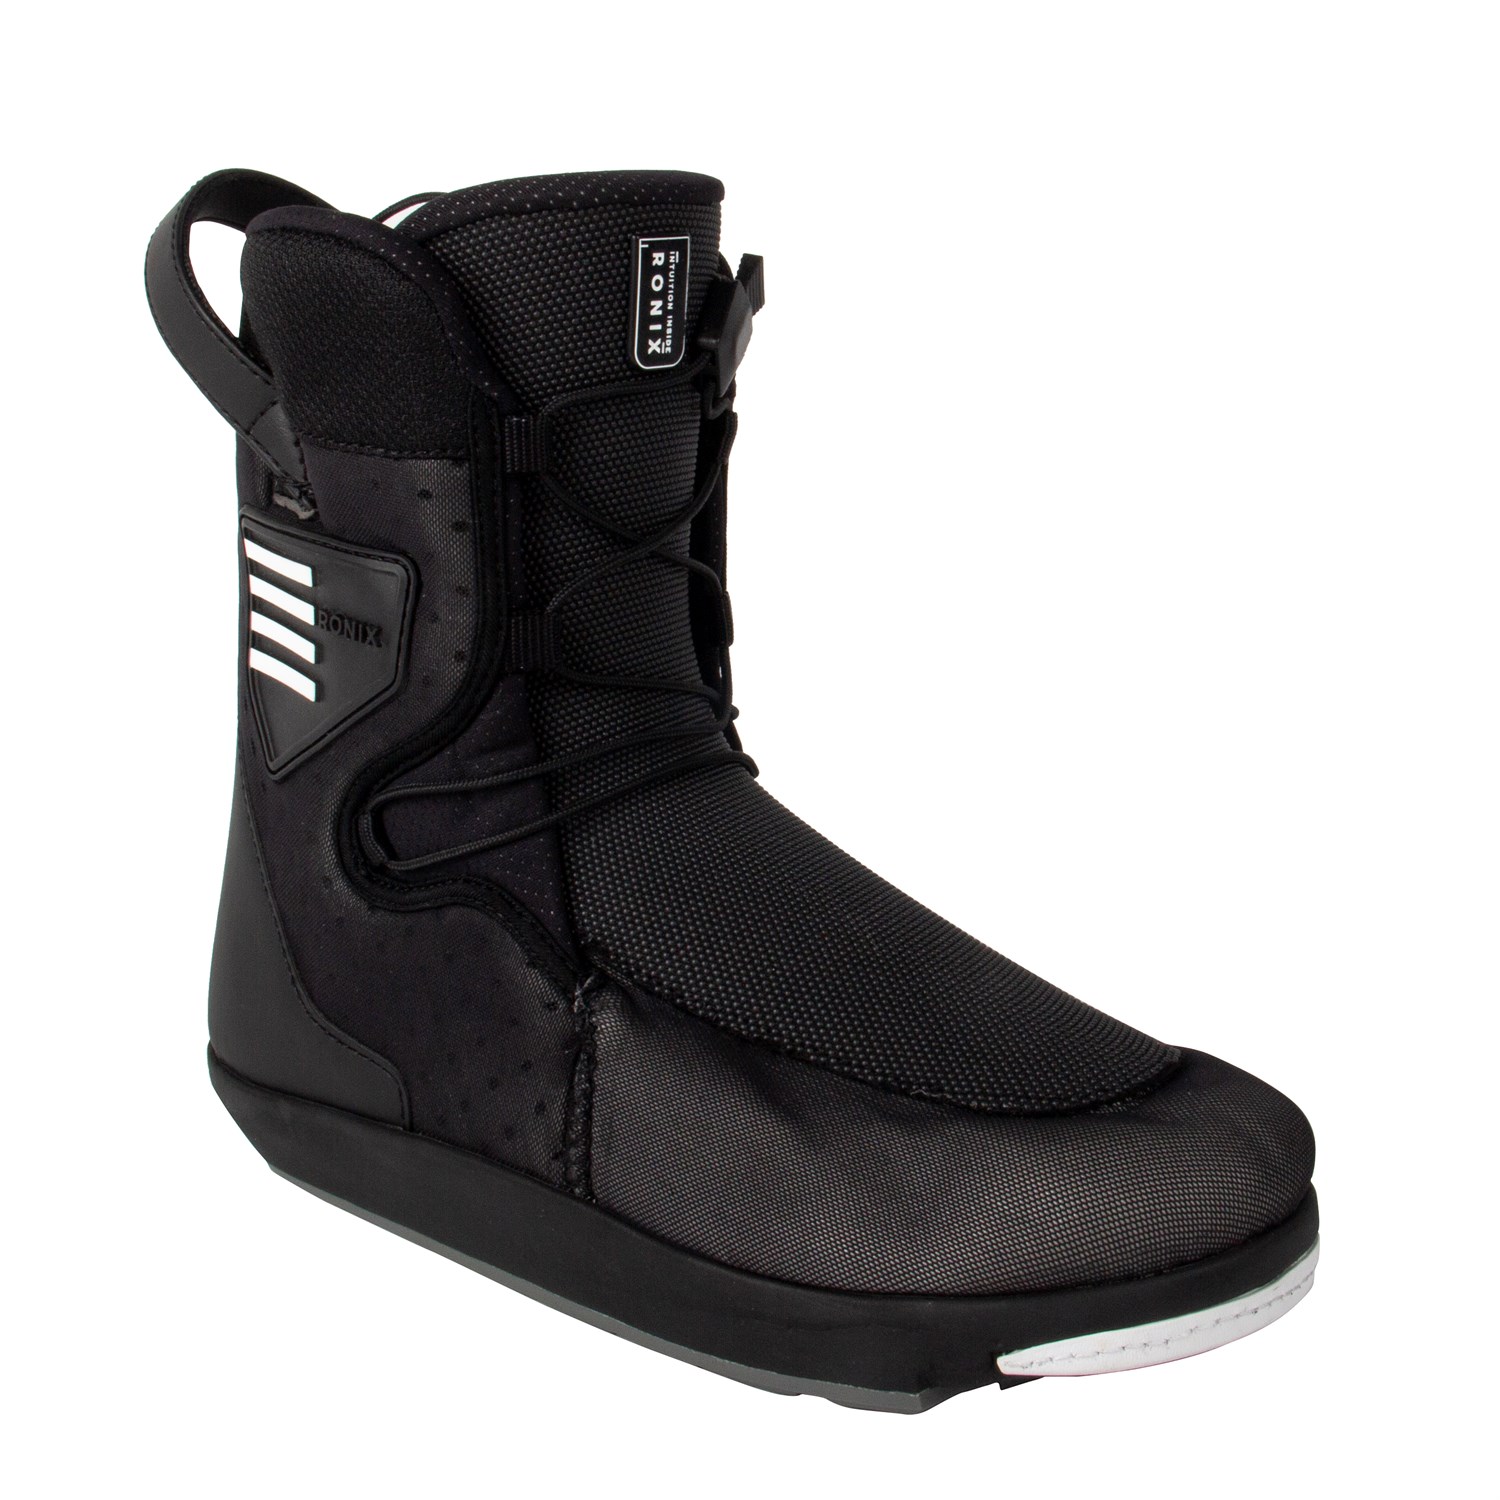 para-Skin Black Intuition Ronix Kinetik Project EXP Wakeboard Boots 